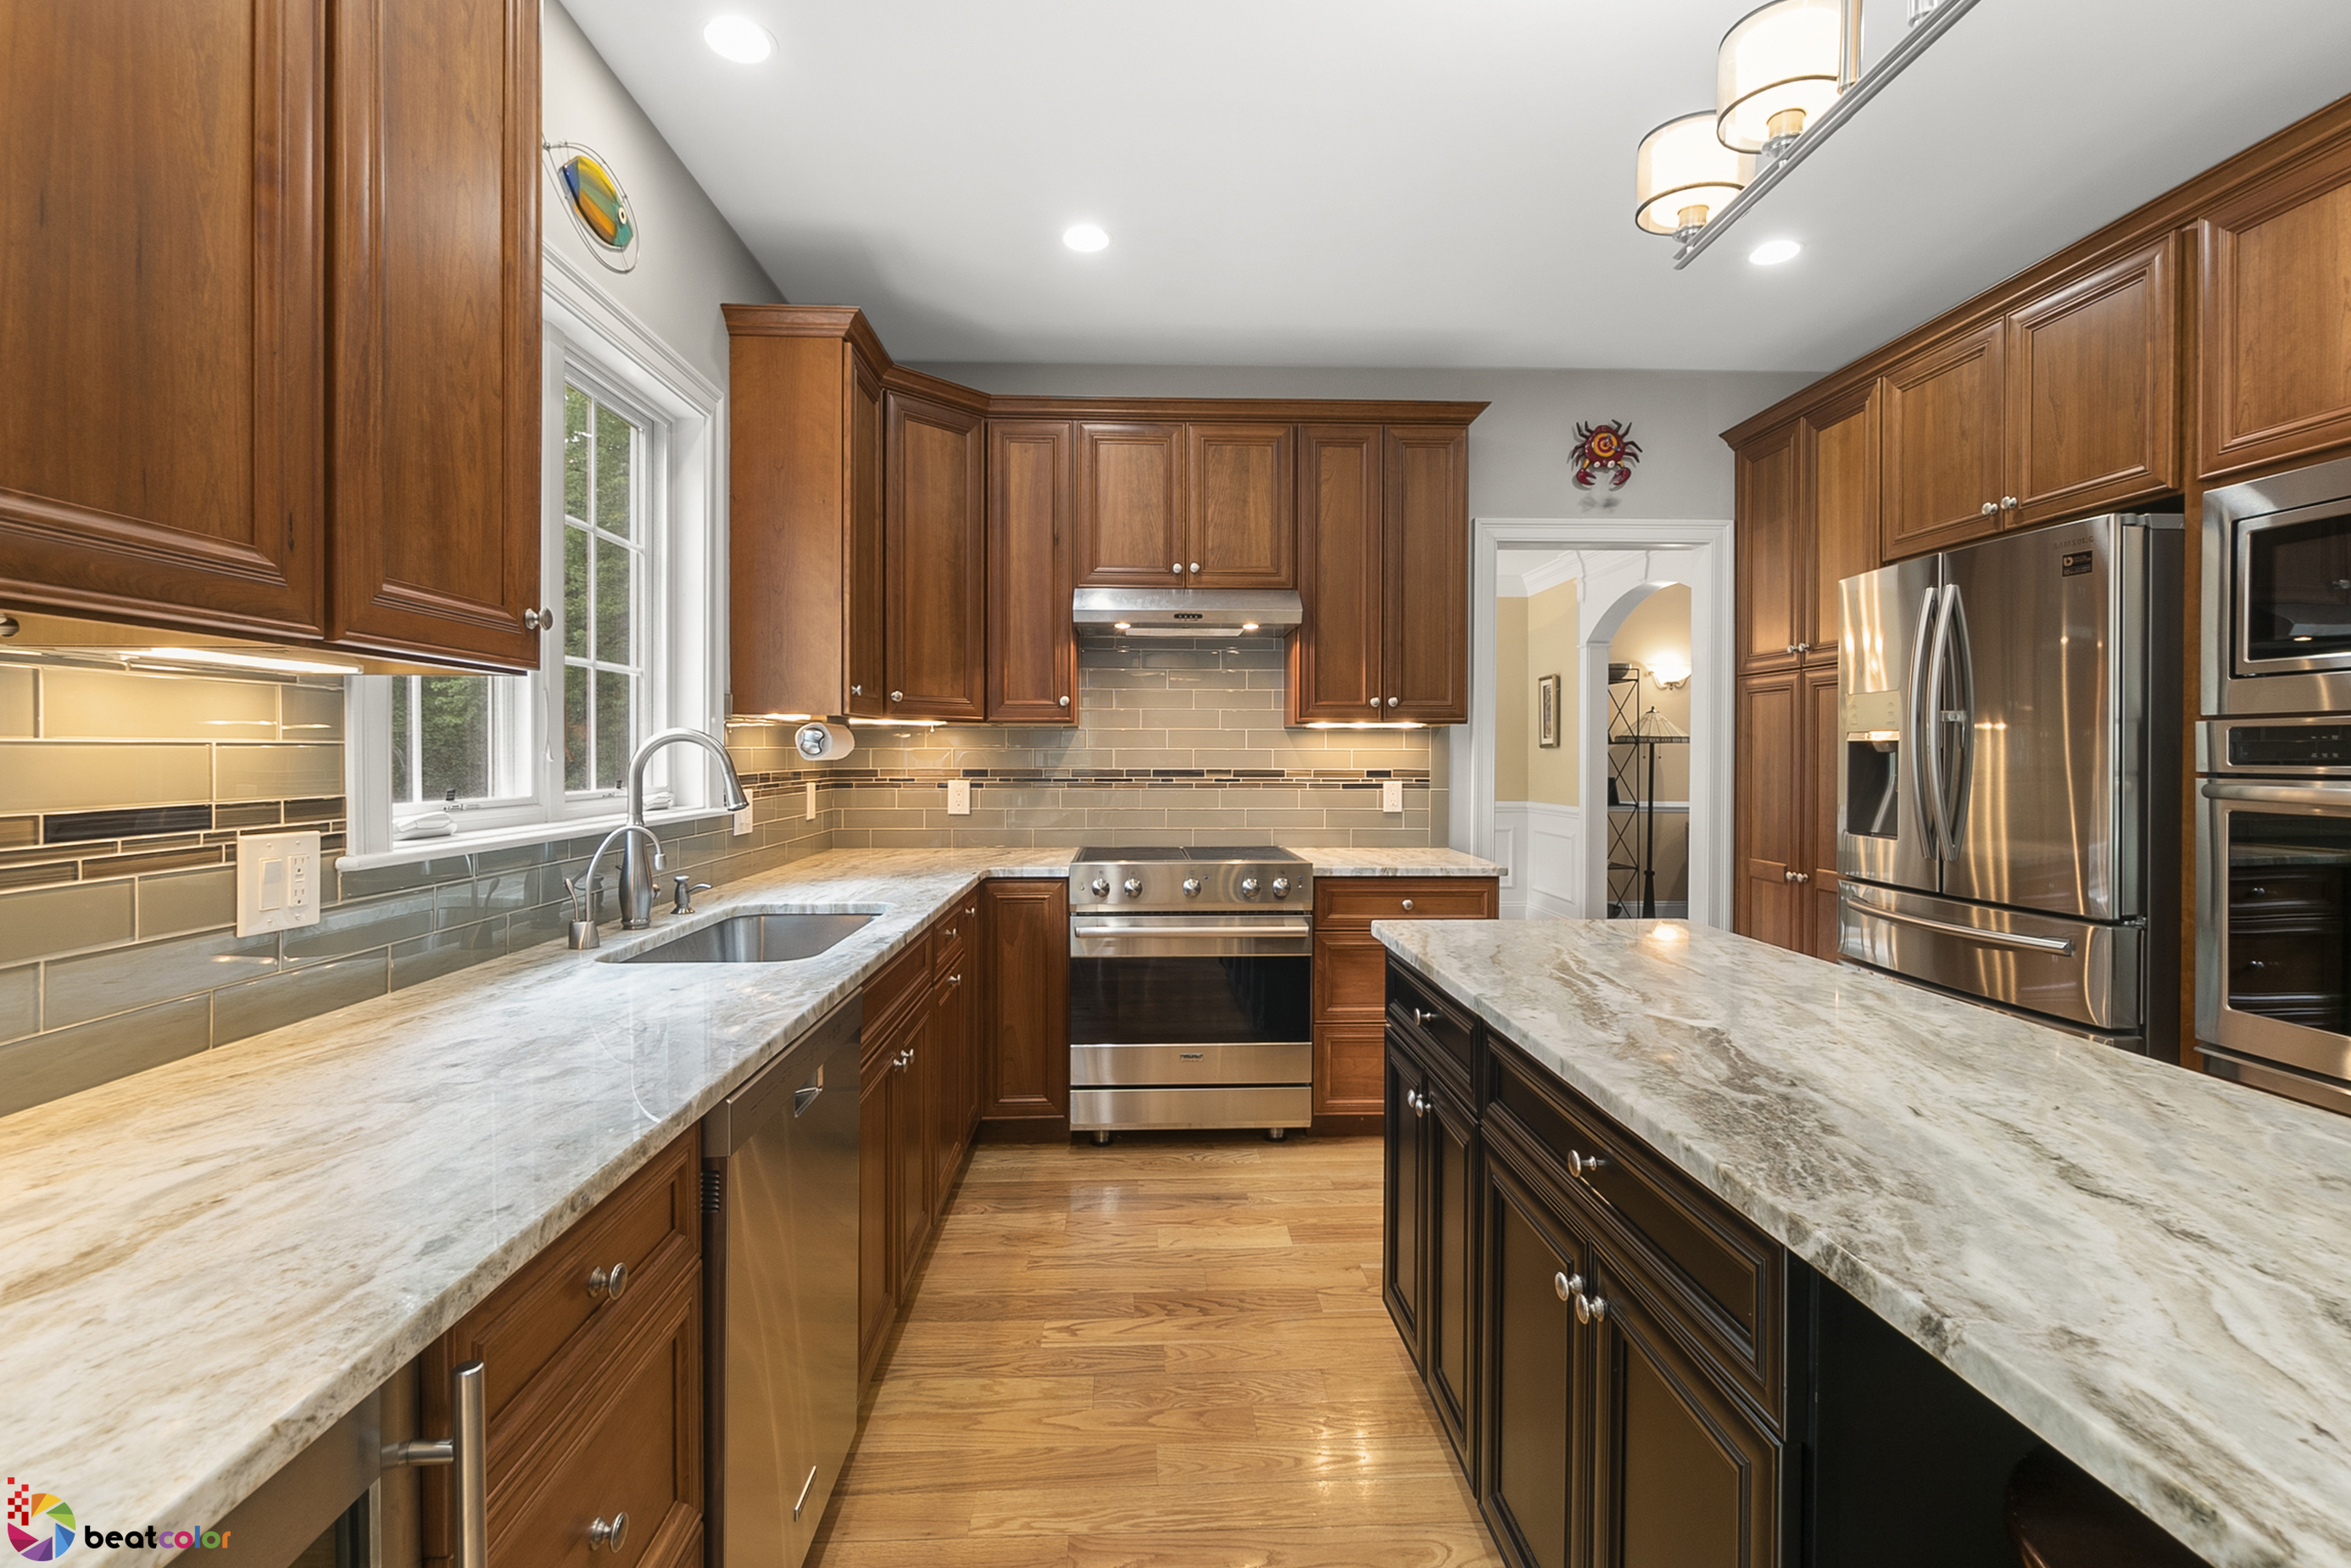 6 Tips to Upgrade Your Kitchen to Wow Your Home Buyers